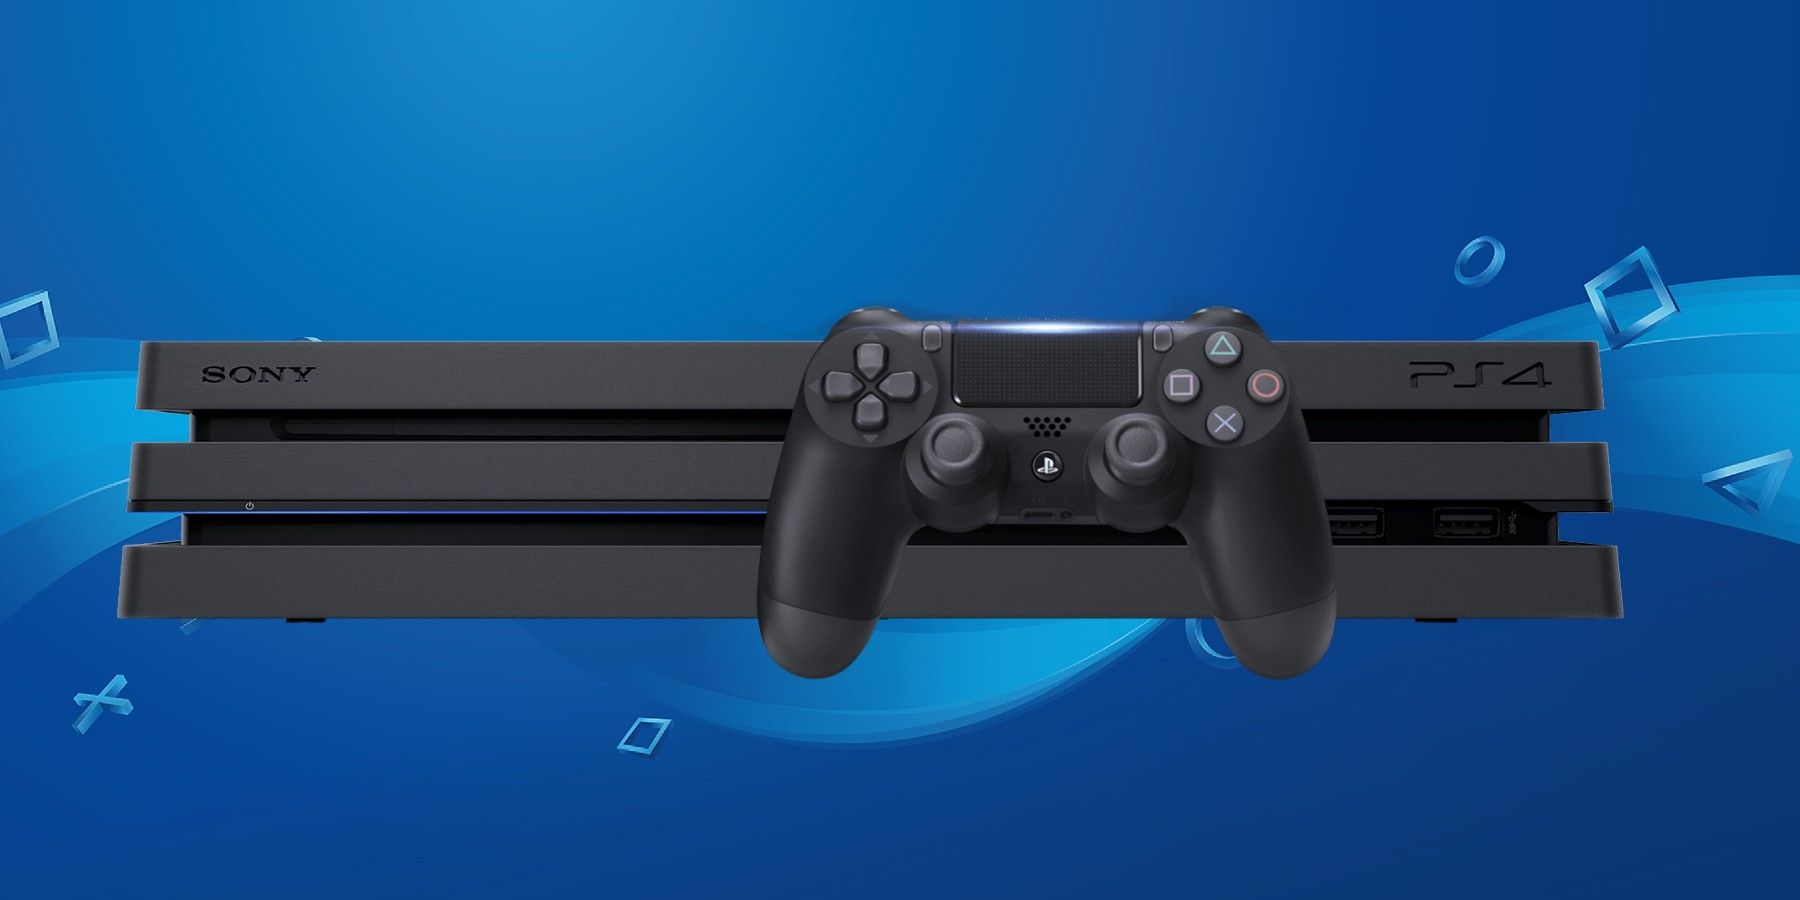 Sony confirms PS4 Pro is discontinued